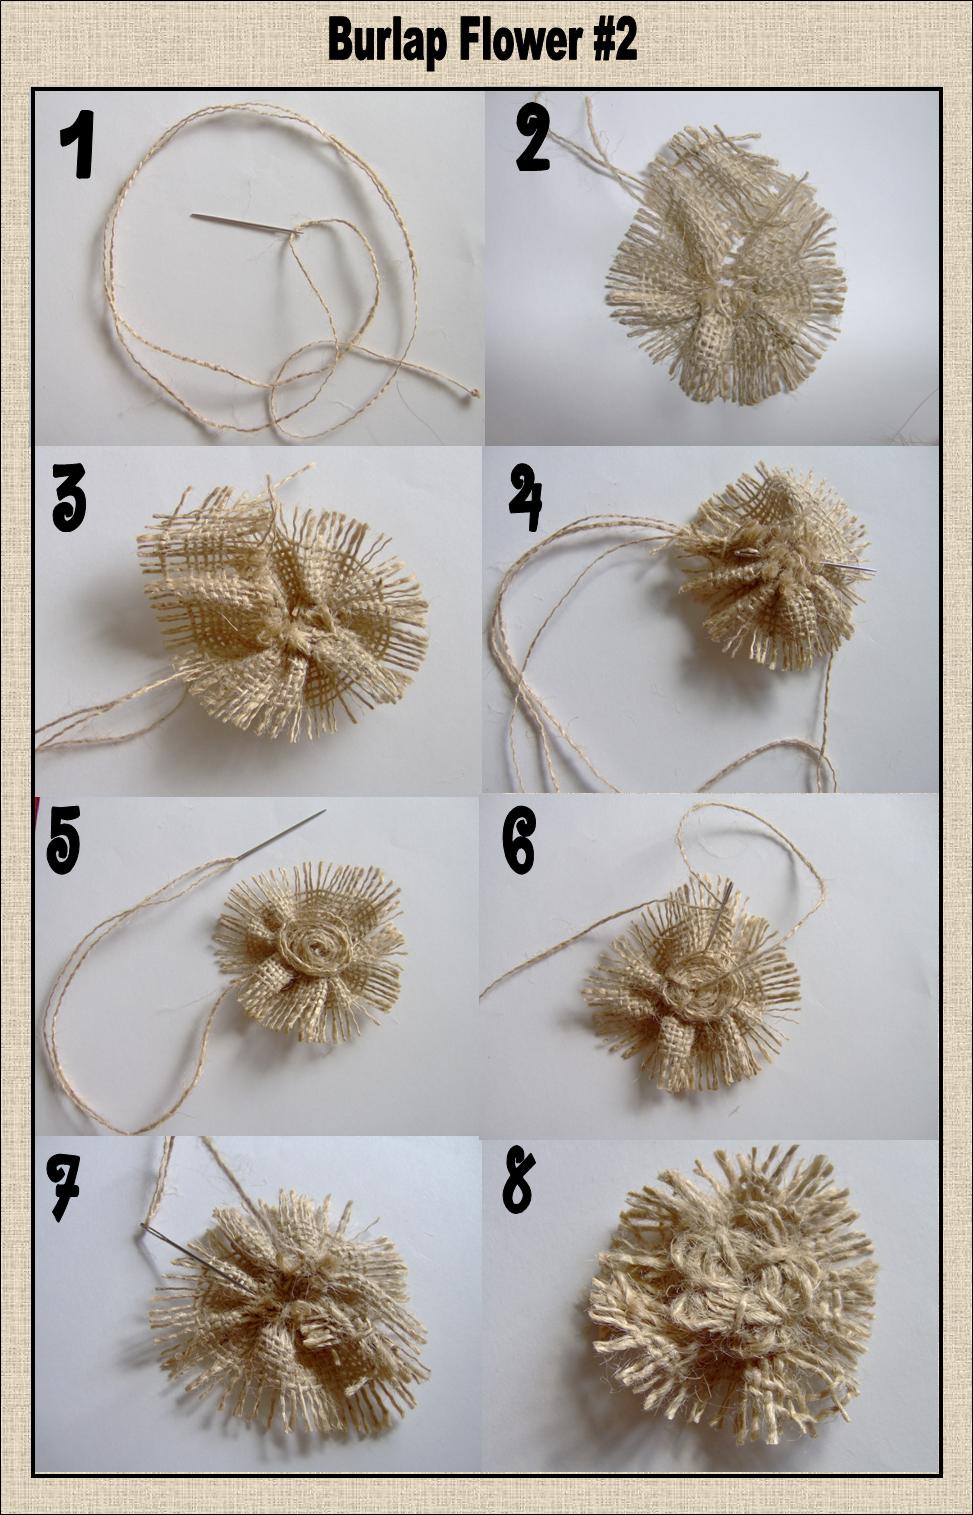 Making Flowers from Fabric and Burlap Tutorial - Craftionary